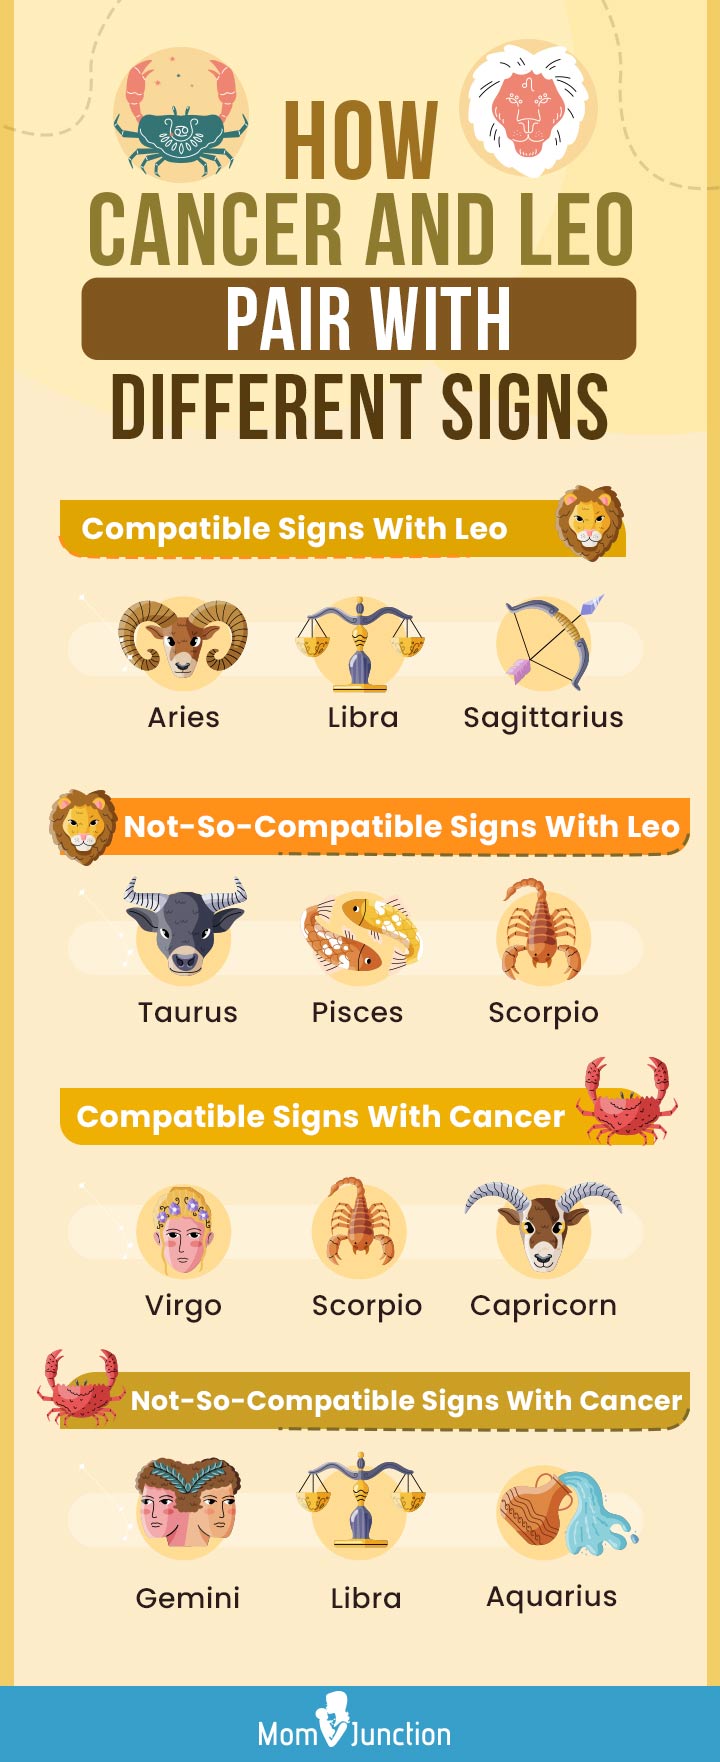 Leo And Cancer Compatibility: Love, Life And Friendship